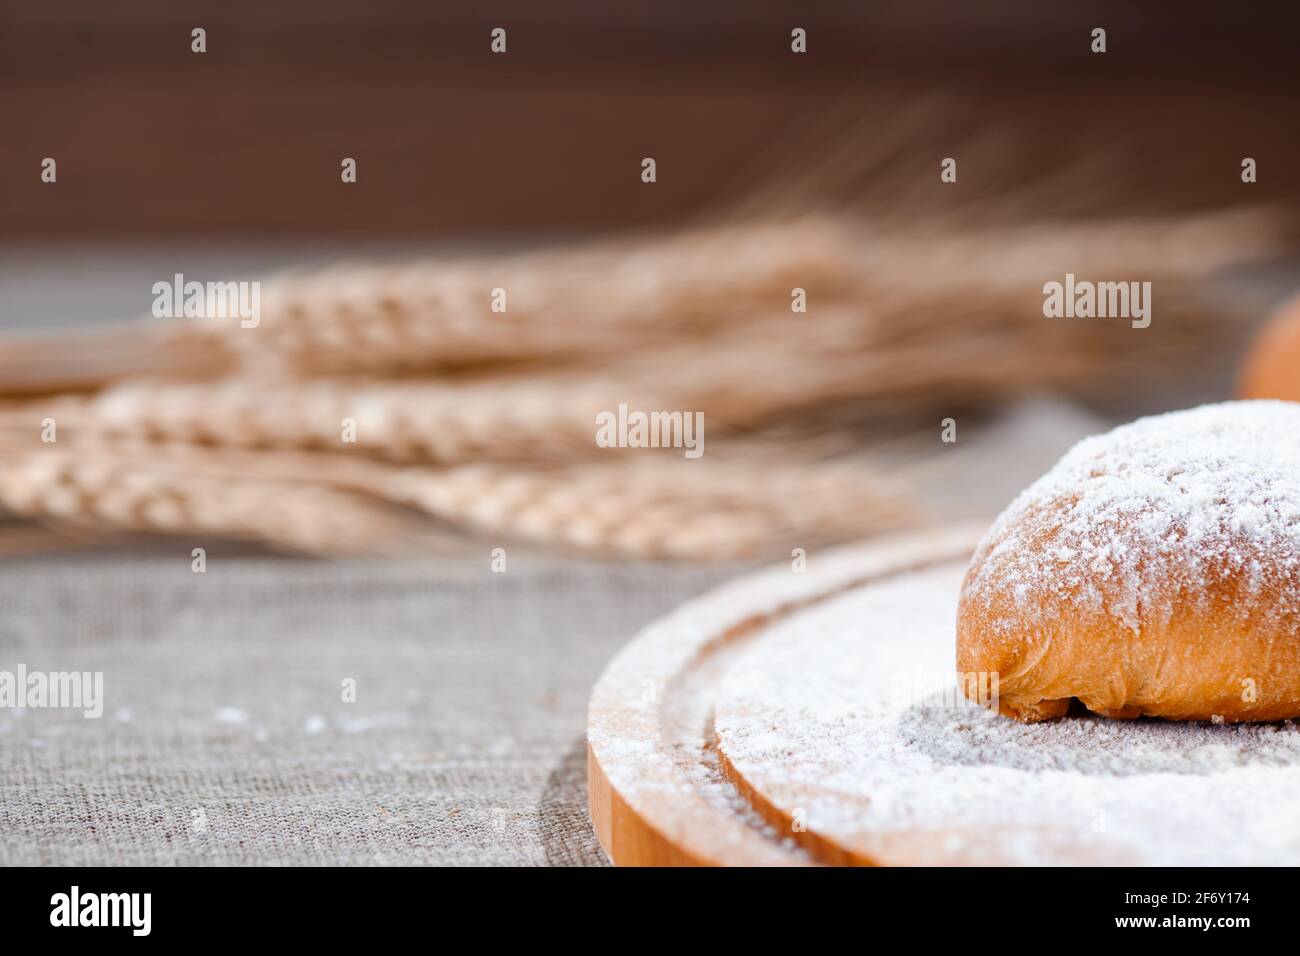 homemade pastries with pies and wheat ears Stock Photo